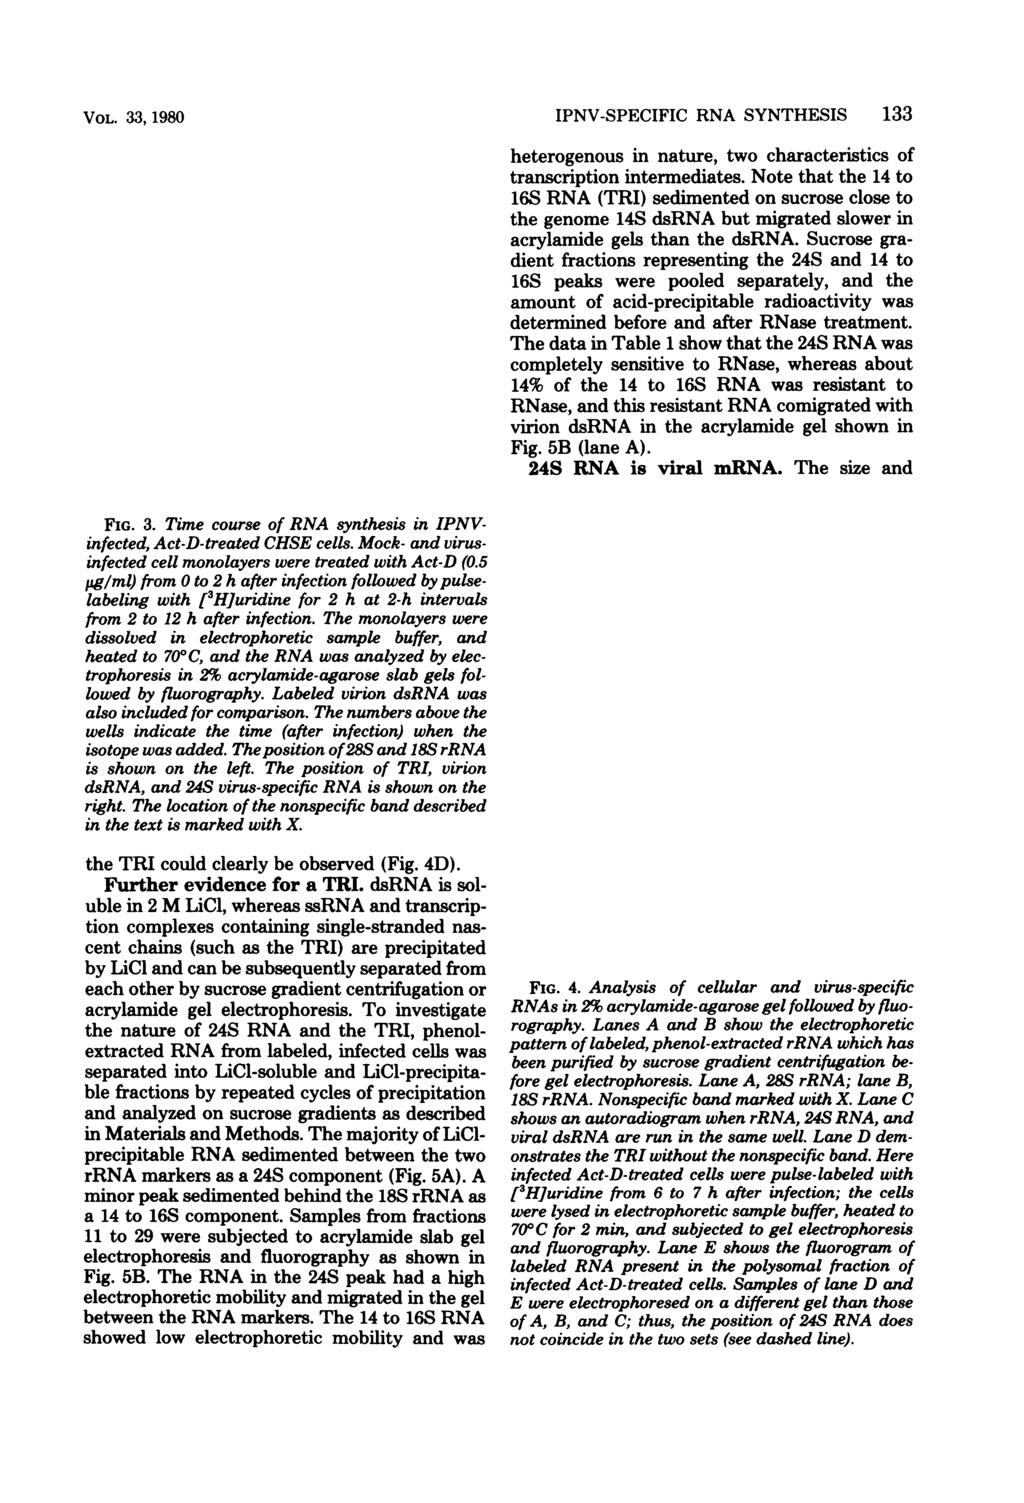 VOL. 33, 1980 28S UN. U N. Act-o 2 4 6 8 10 12 18So _ FIG. 3. Time course of RNA synthesis in IPNVinfected, Act-D-treated CHSE cells.